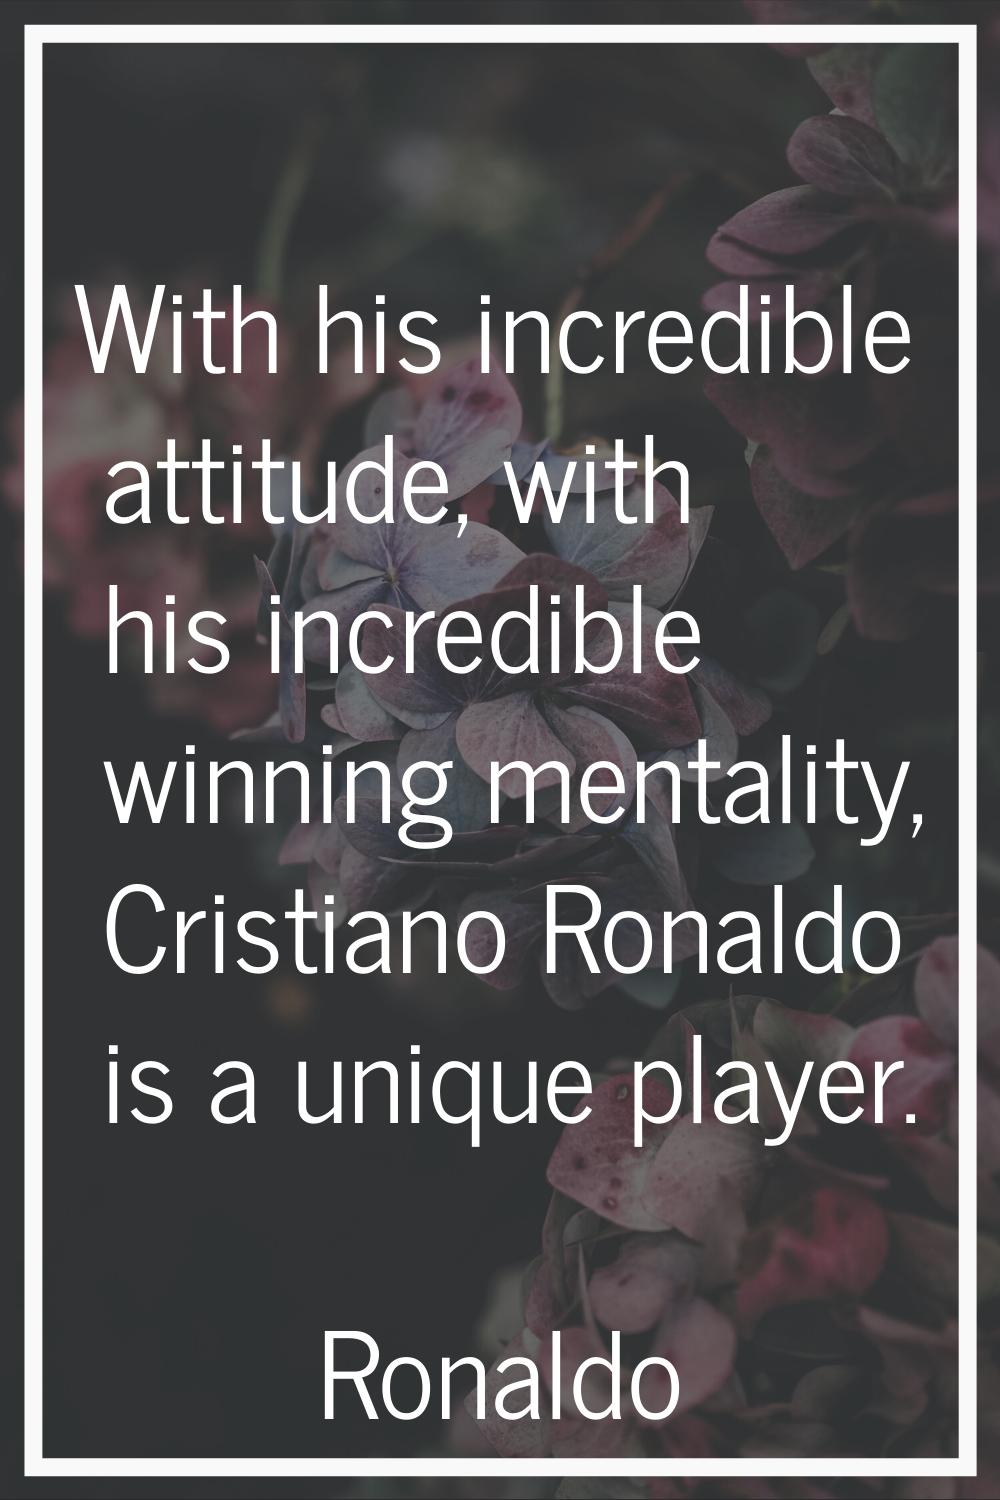 With his incredible attitude, with his incredible winning mentality, Cristiano Ronaldo is a unique 